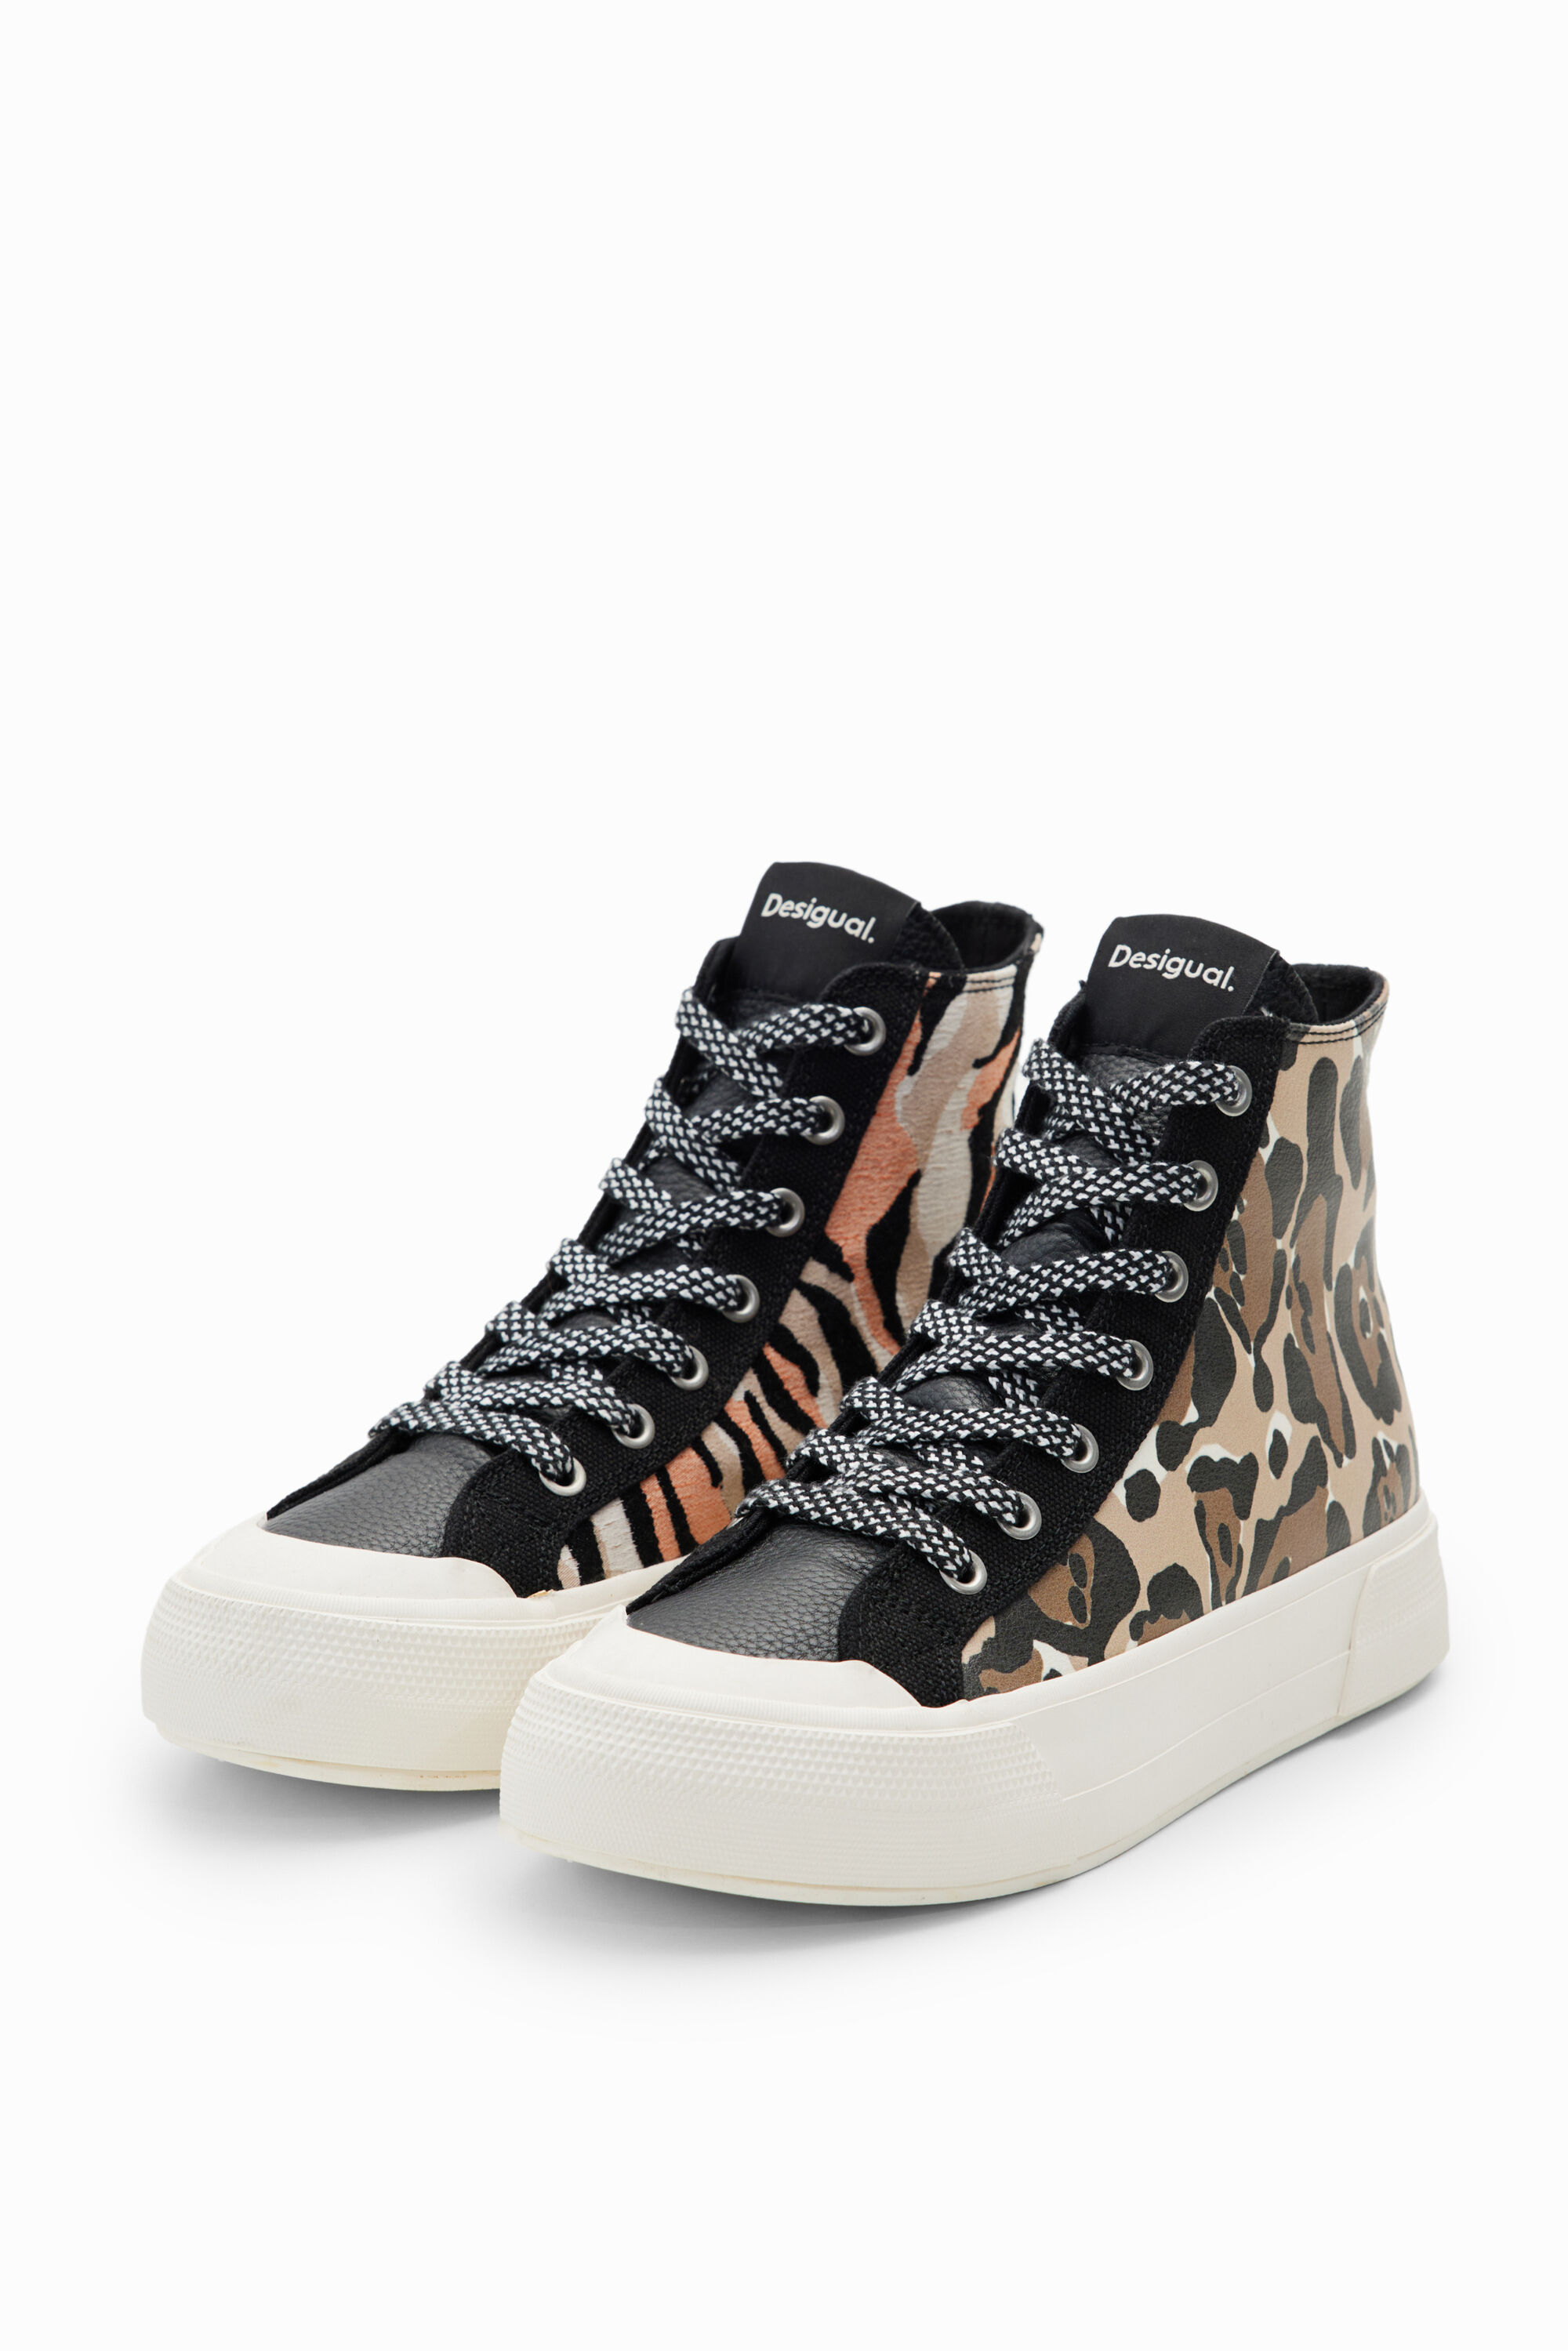 High-top animal print sneakers - MATERIAL FINISHES - 40